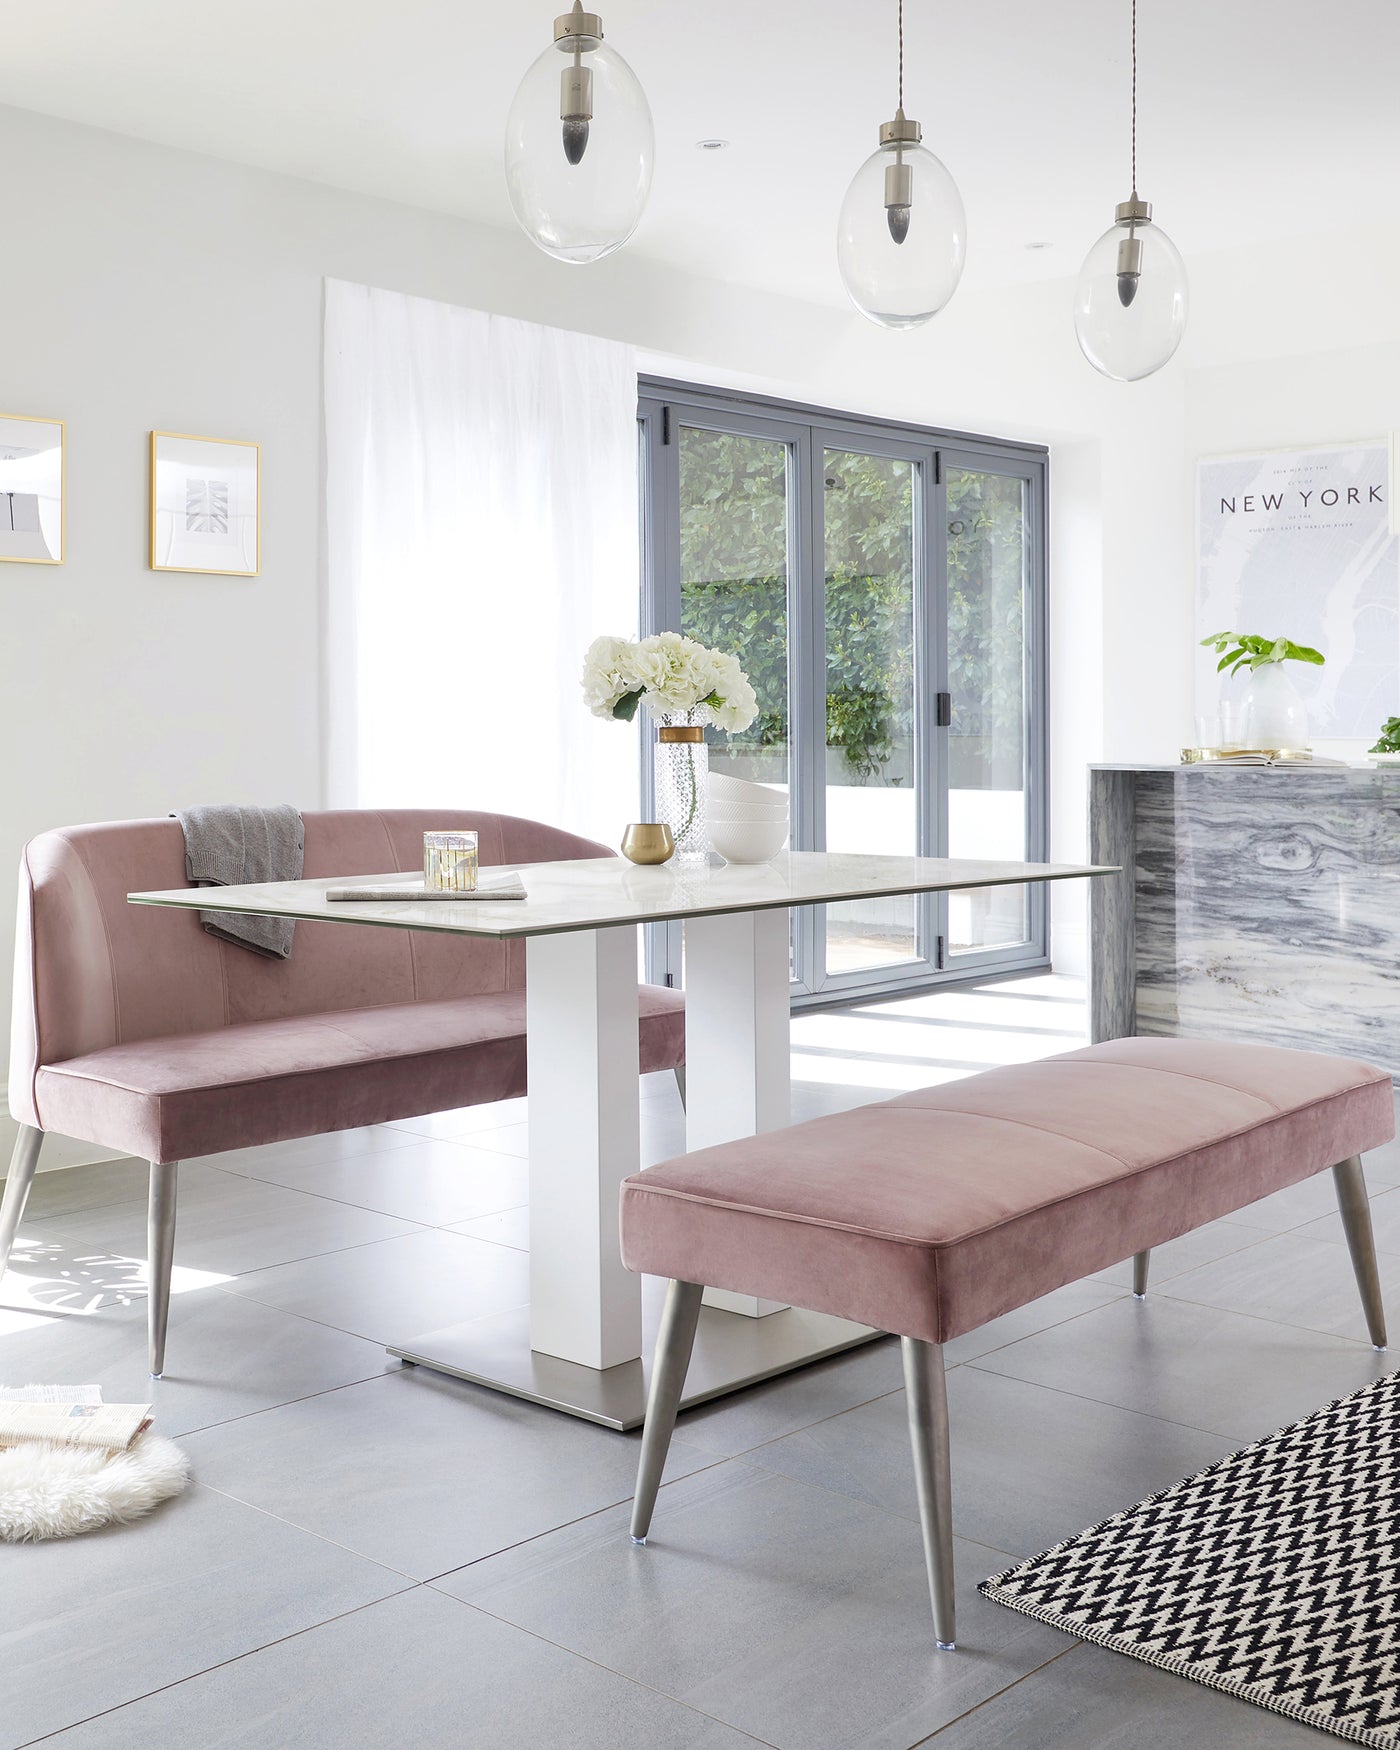 Modern dining space featuring a blush-coloured upholstered corner bench with backrest, a complementary bench without a backrest, and a rectangular white marble-topped dining table with a sleek white base and metallic silver legs.